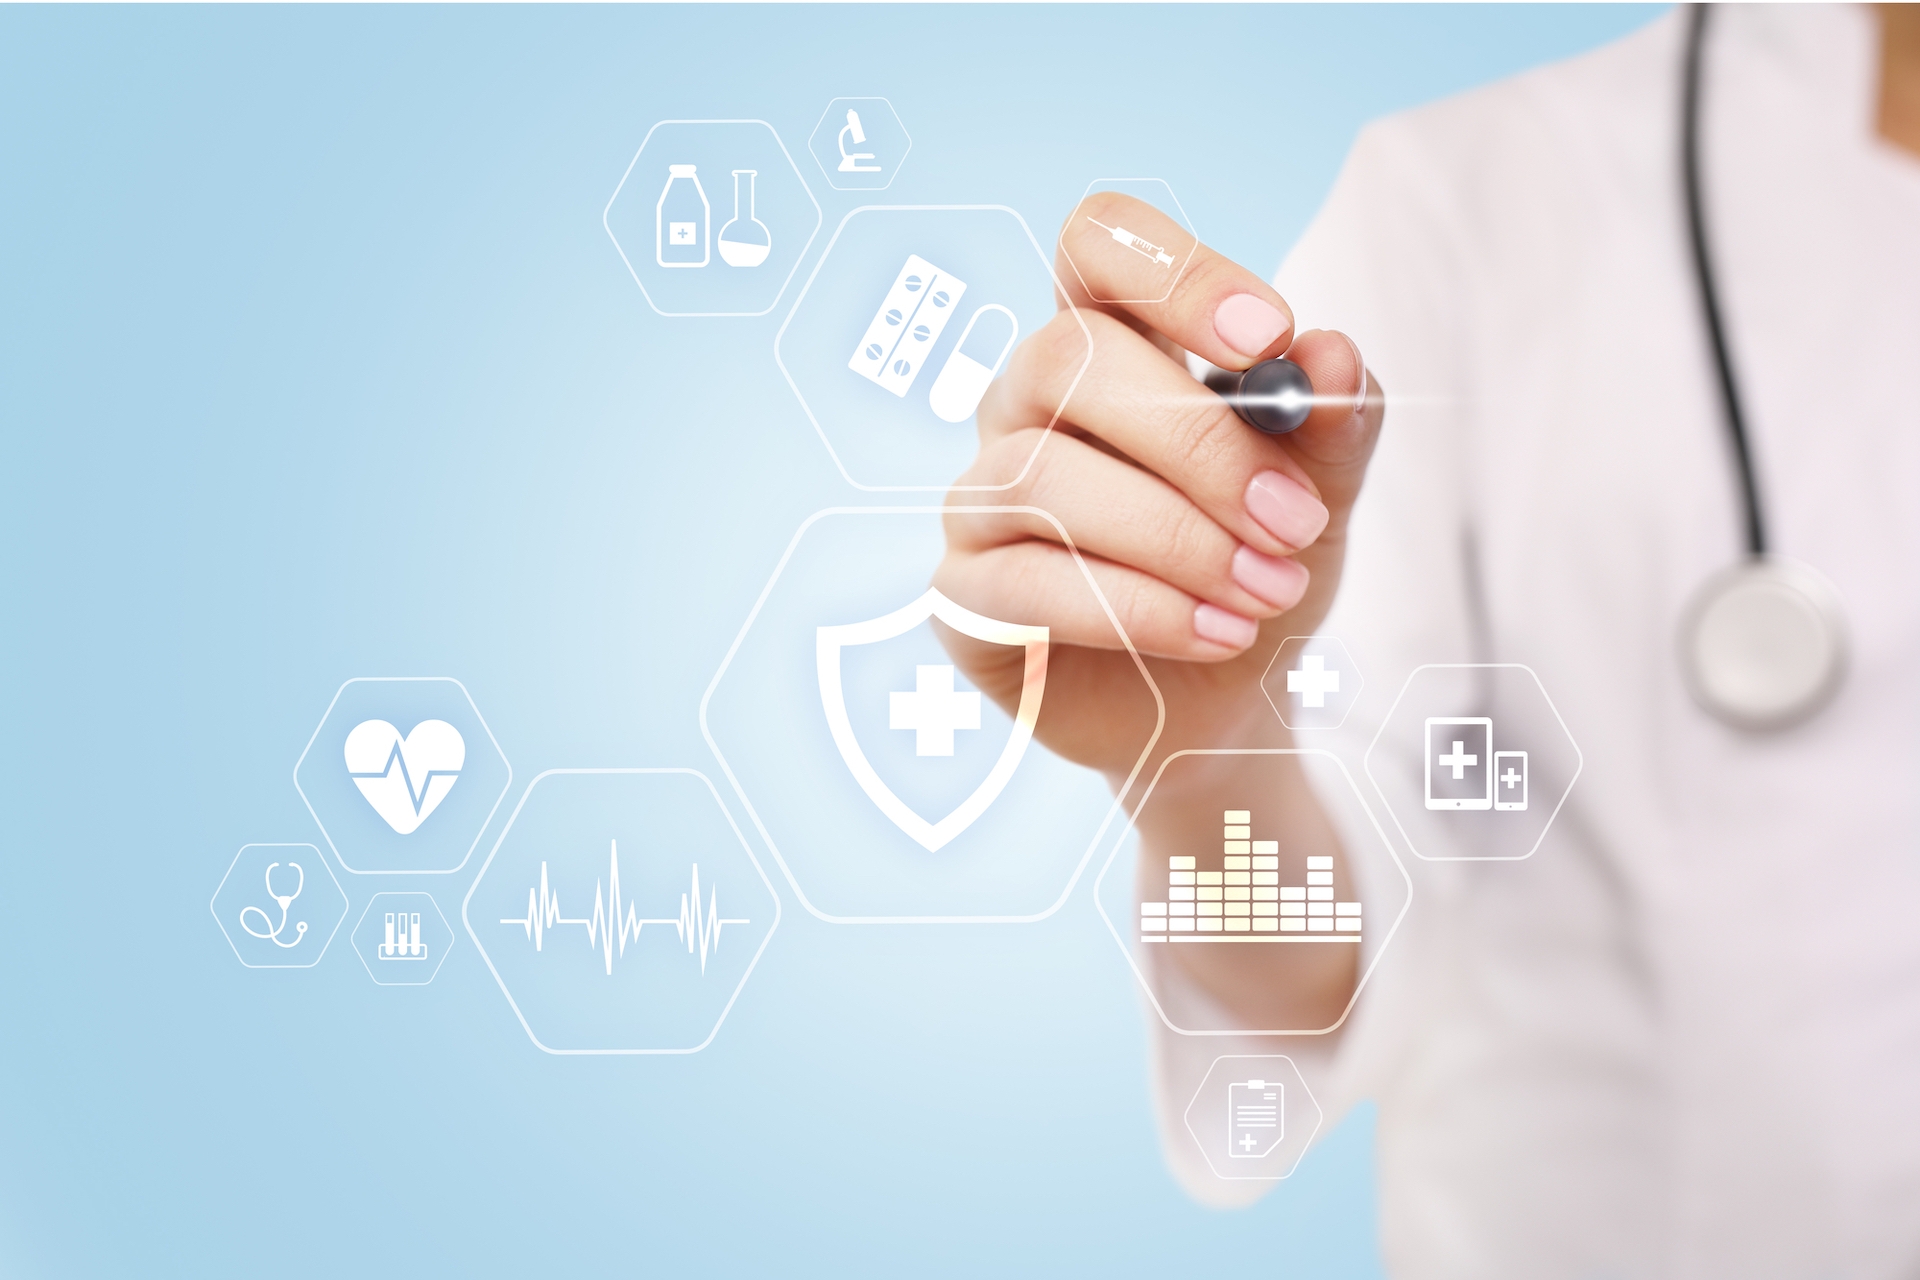 How MFA integrates with Parallels RAS to enable secure virtual healthcare solutions